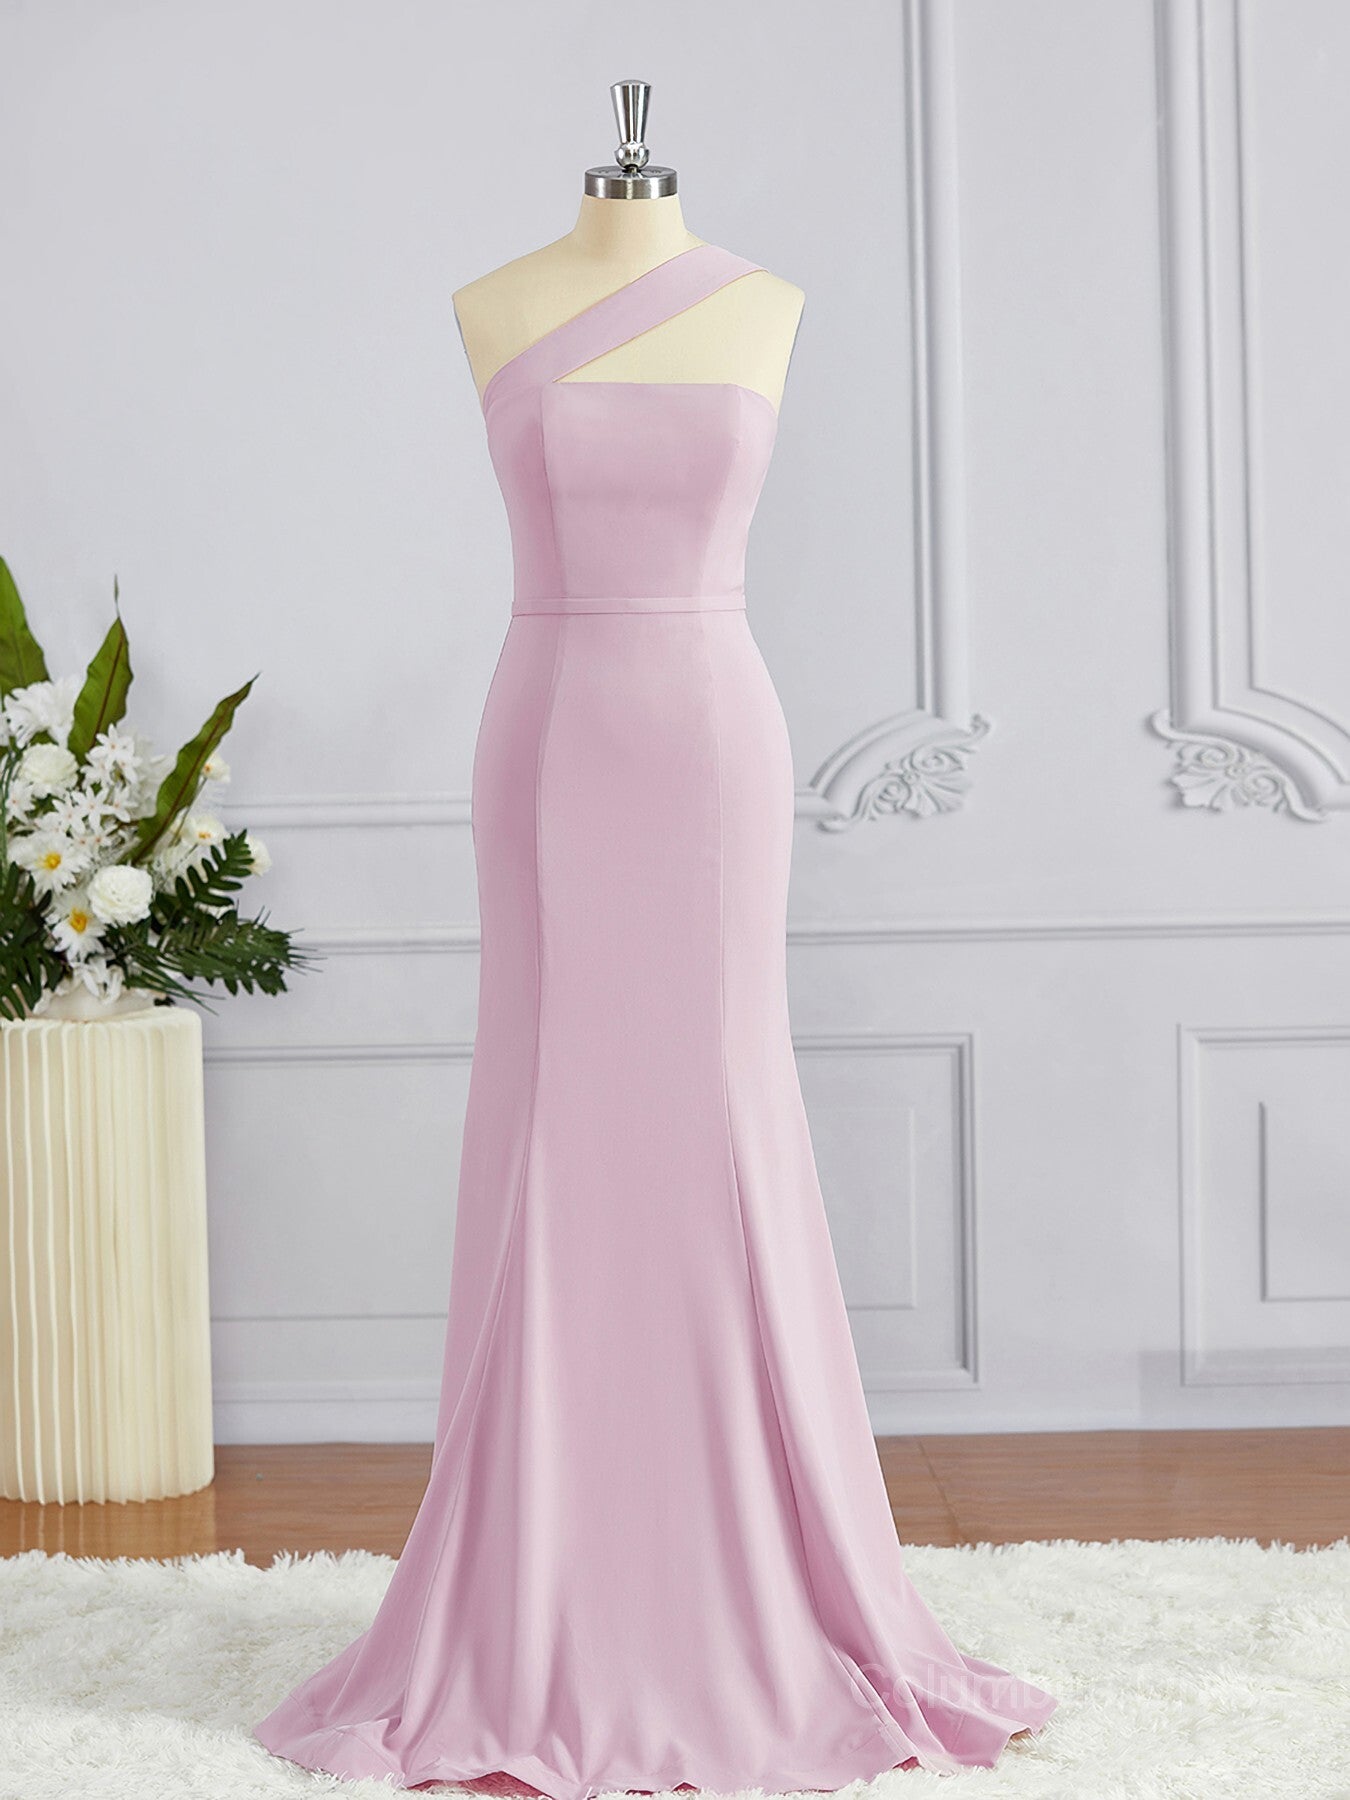 Sheath/Column One-Shoulder Floor-Length Stretch Crepe Corset Bridesmaid Dresses outfit, Prom Dress Different